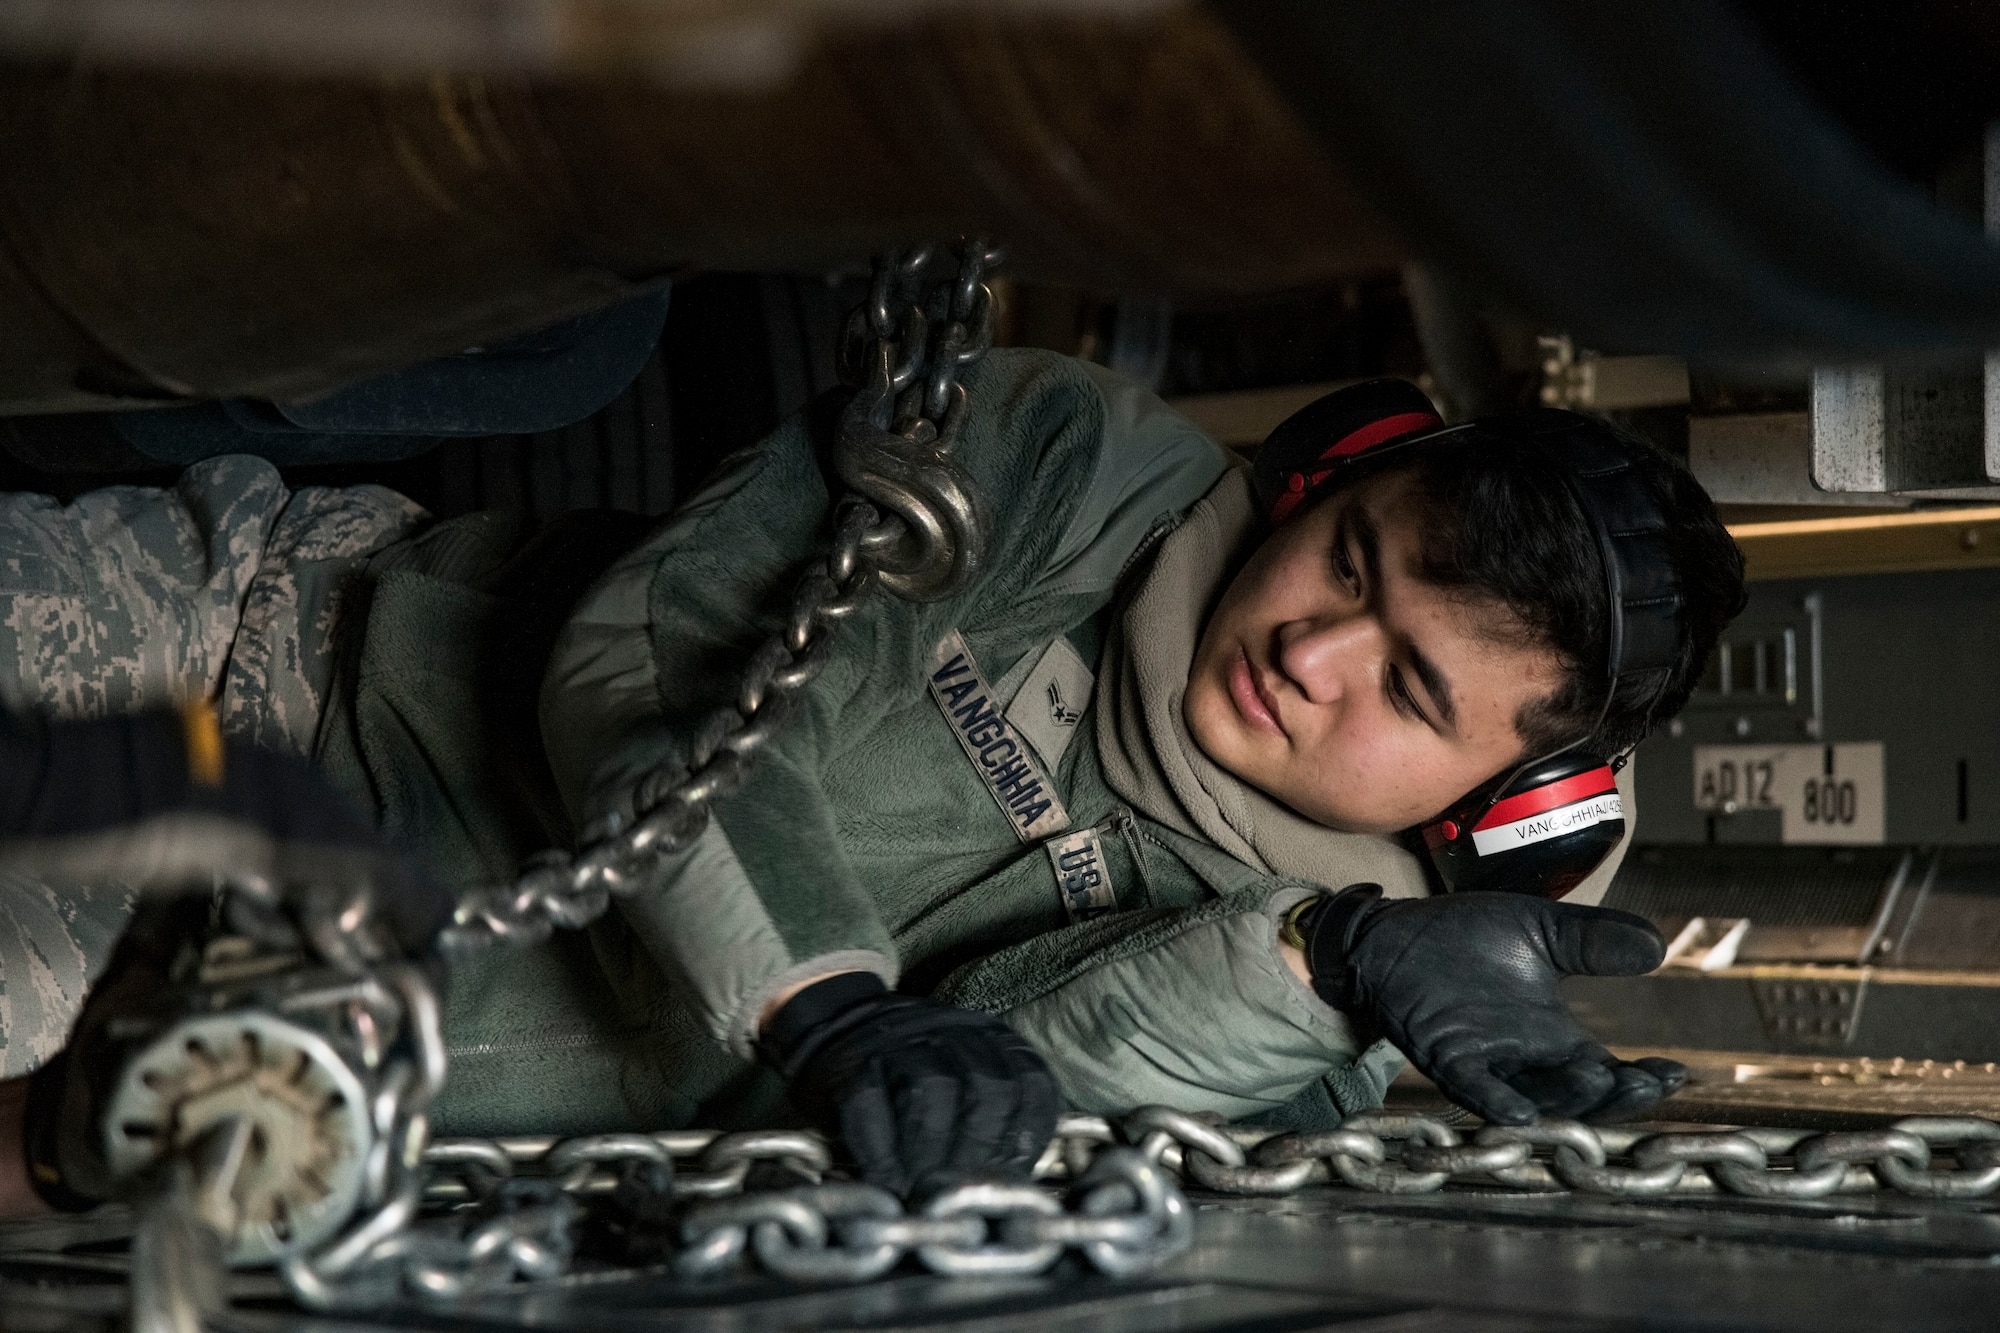 Underneath a vehicle, Airman 1st Class Jacob Vangchhia, 436th Aerial Port Squadron ramp operations specialist, attaches cargo chains to secure a vehicle to a C-17 Globemaster III cargo floor Jan. 11, 2019, at Dover Air Force Base, Del. Vangchhia and other ramp operations personnel loaded five vehicles belonging to the Delaware National Guard's 31st Civil Support Team, Weapons of Mass Destruction headquartered in Smyrna, Del. (U.S. Air Force photo by Roland Balik)